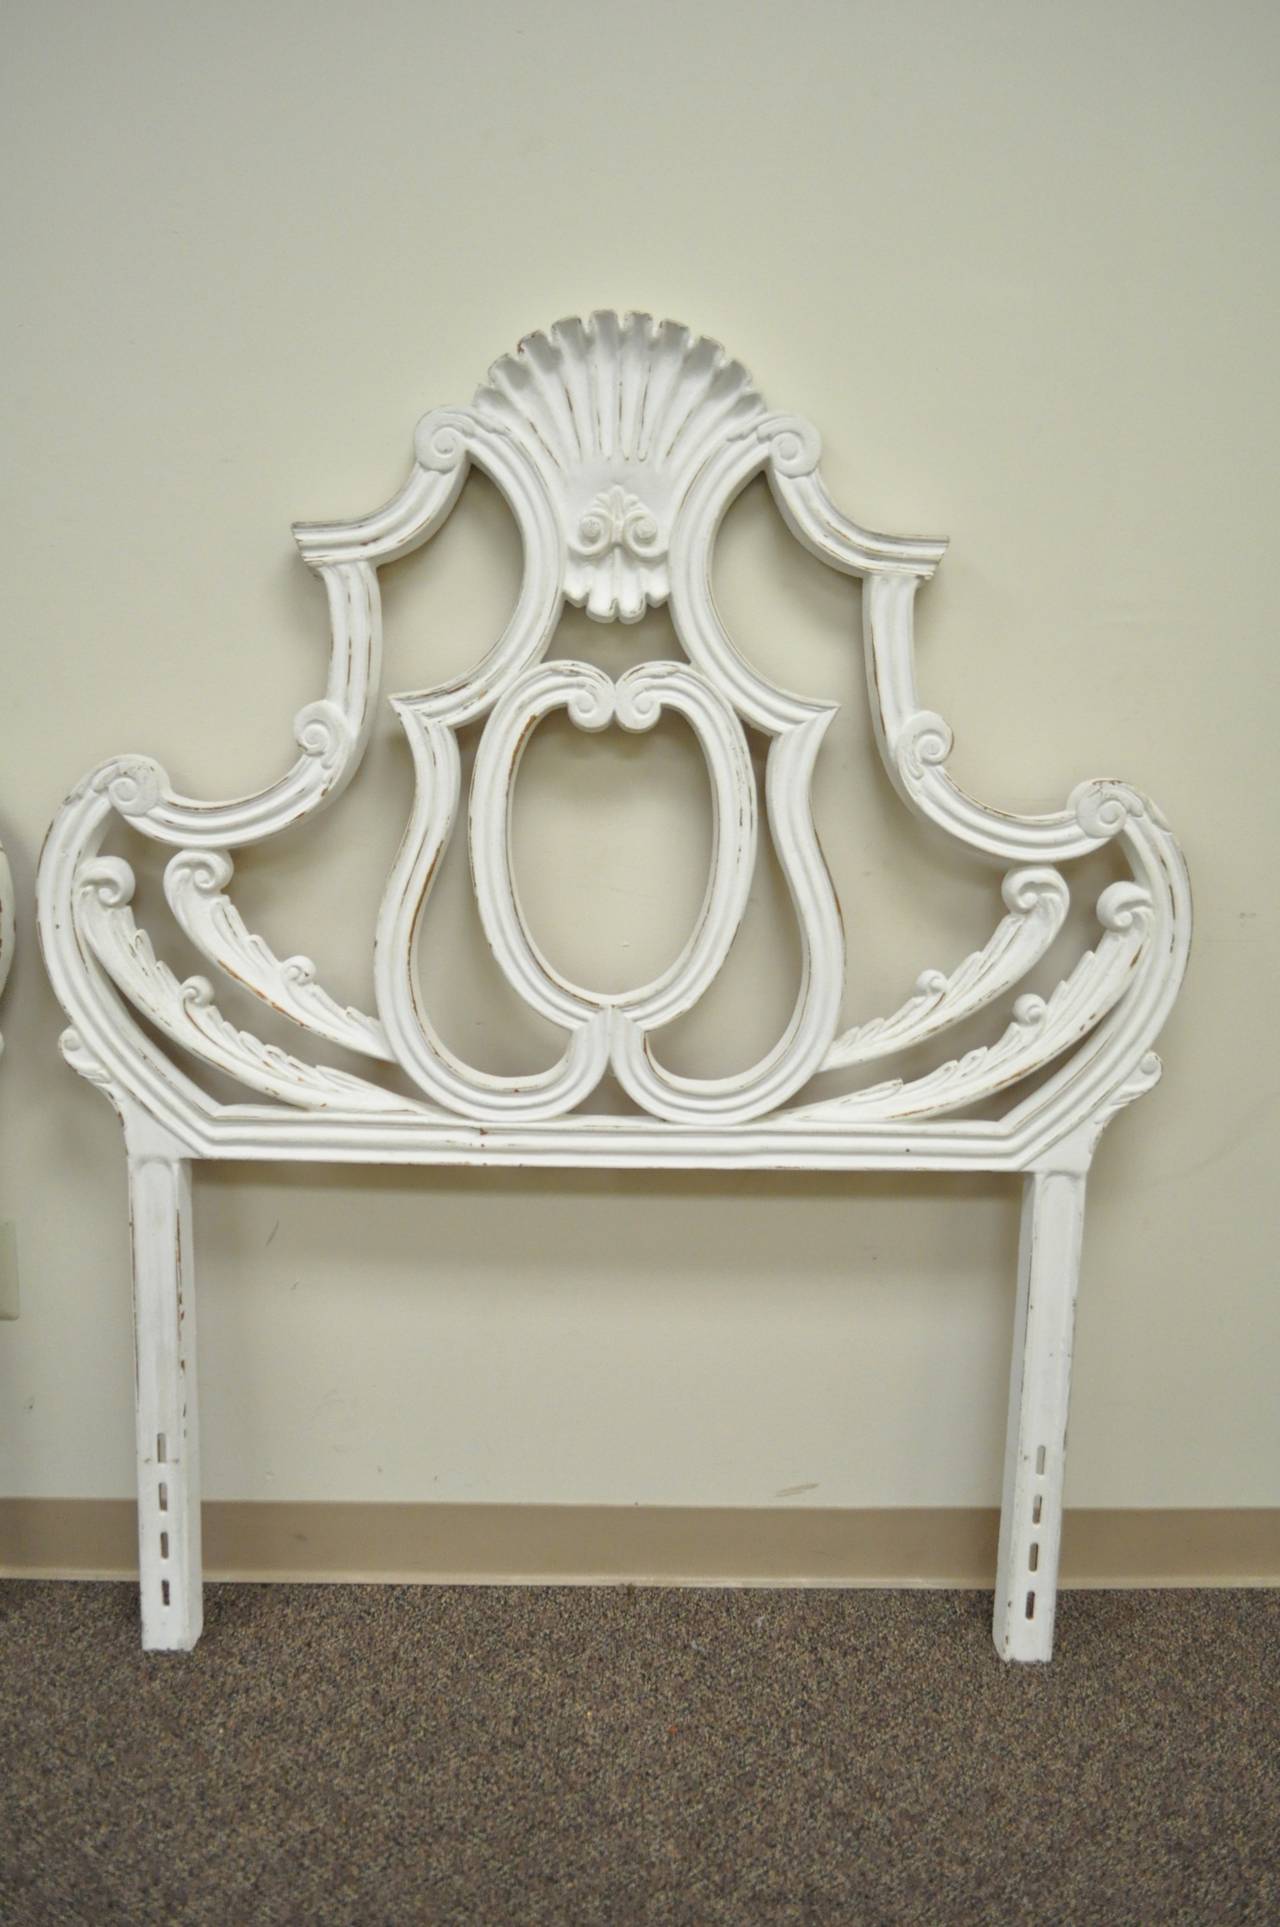 Very unique pair of wonderfully cast metal, shell form, single bed headboards in the French Rococo / Hollywood Regency style. This vintage pair features scrolling forms with shell designed pediments. Headboards are finished in an antiqued white